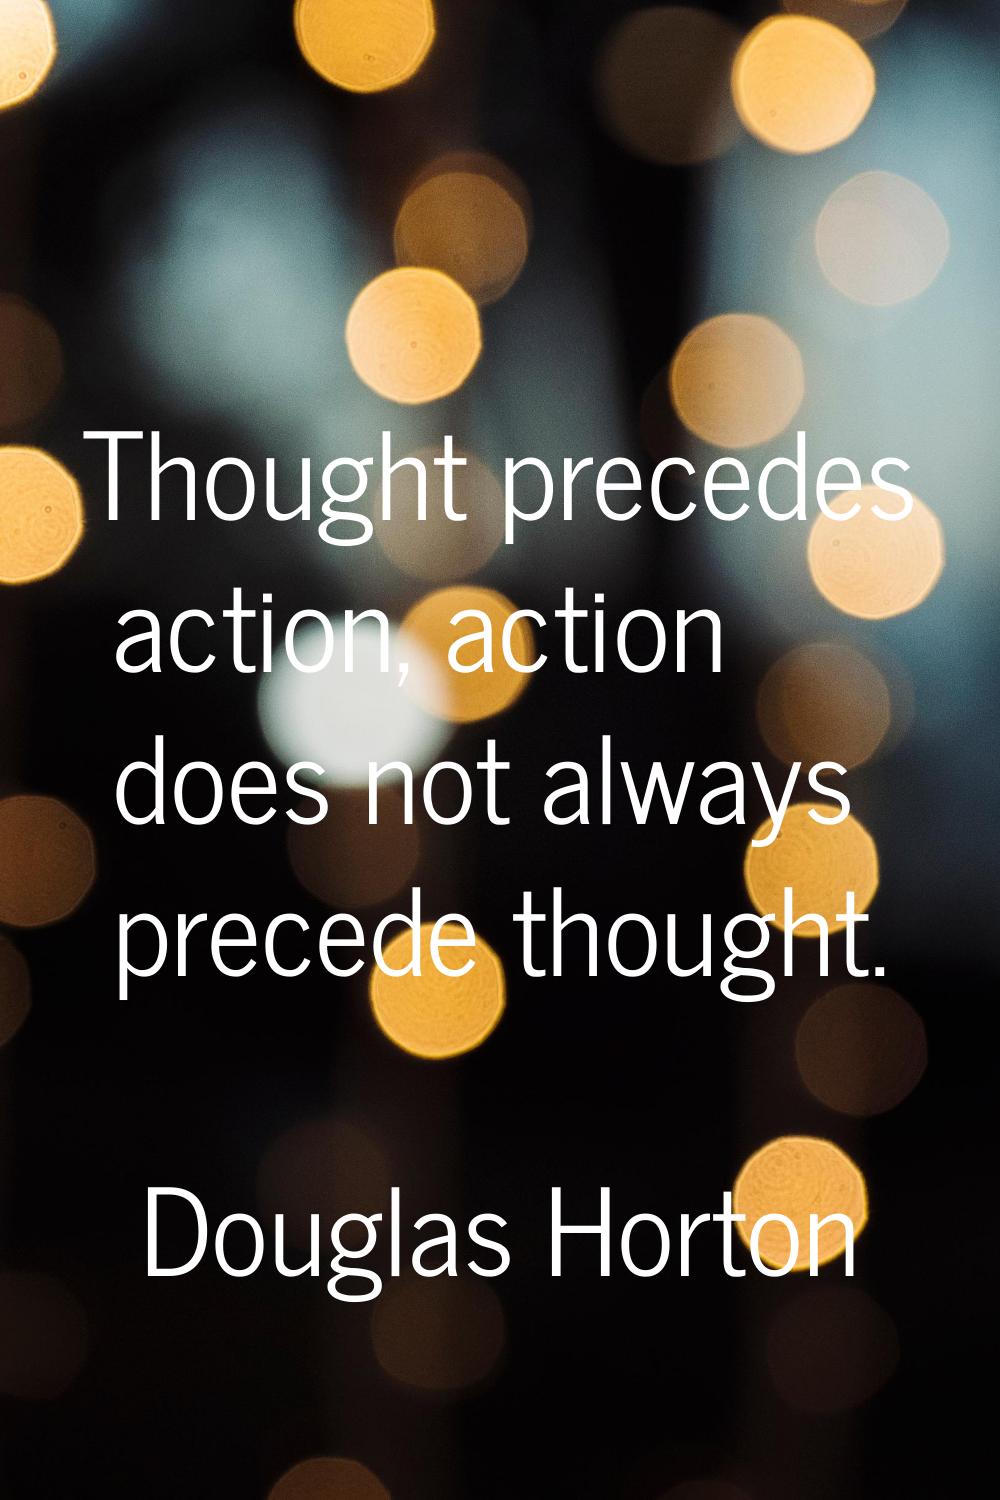 Thought precedes action, action does not always precede thought.